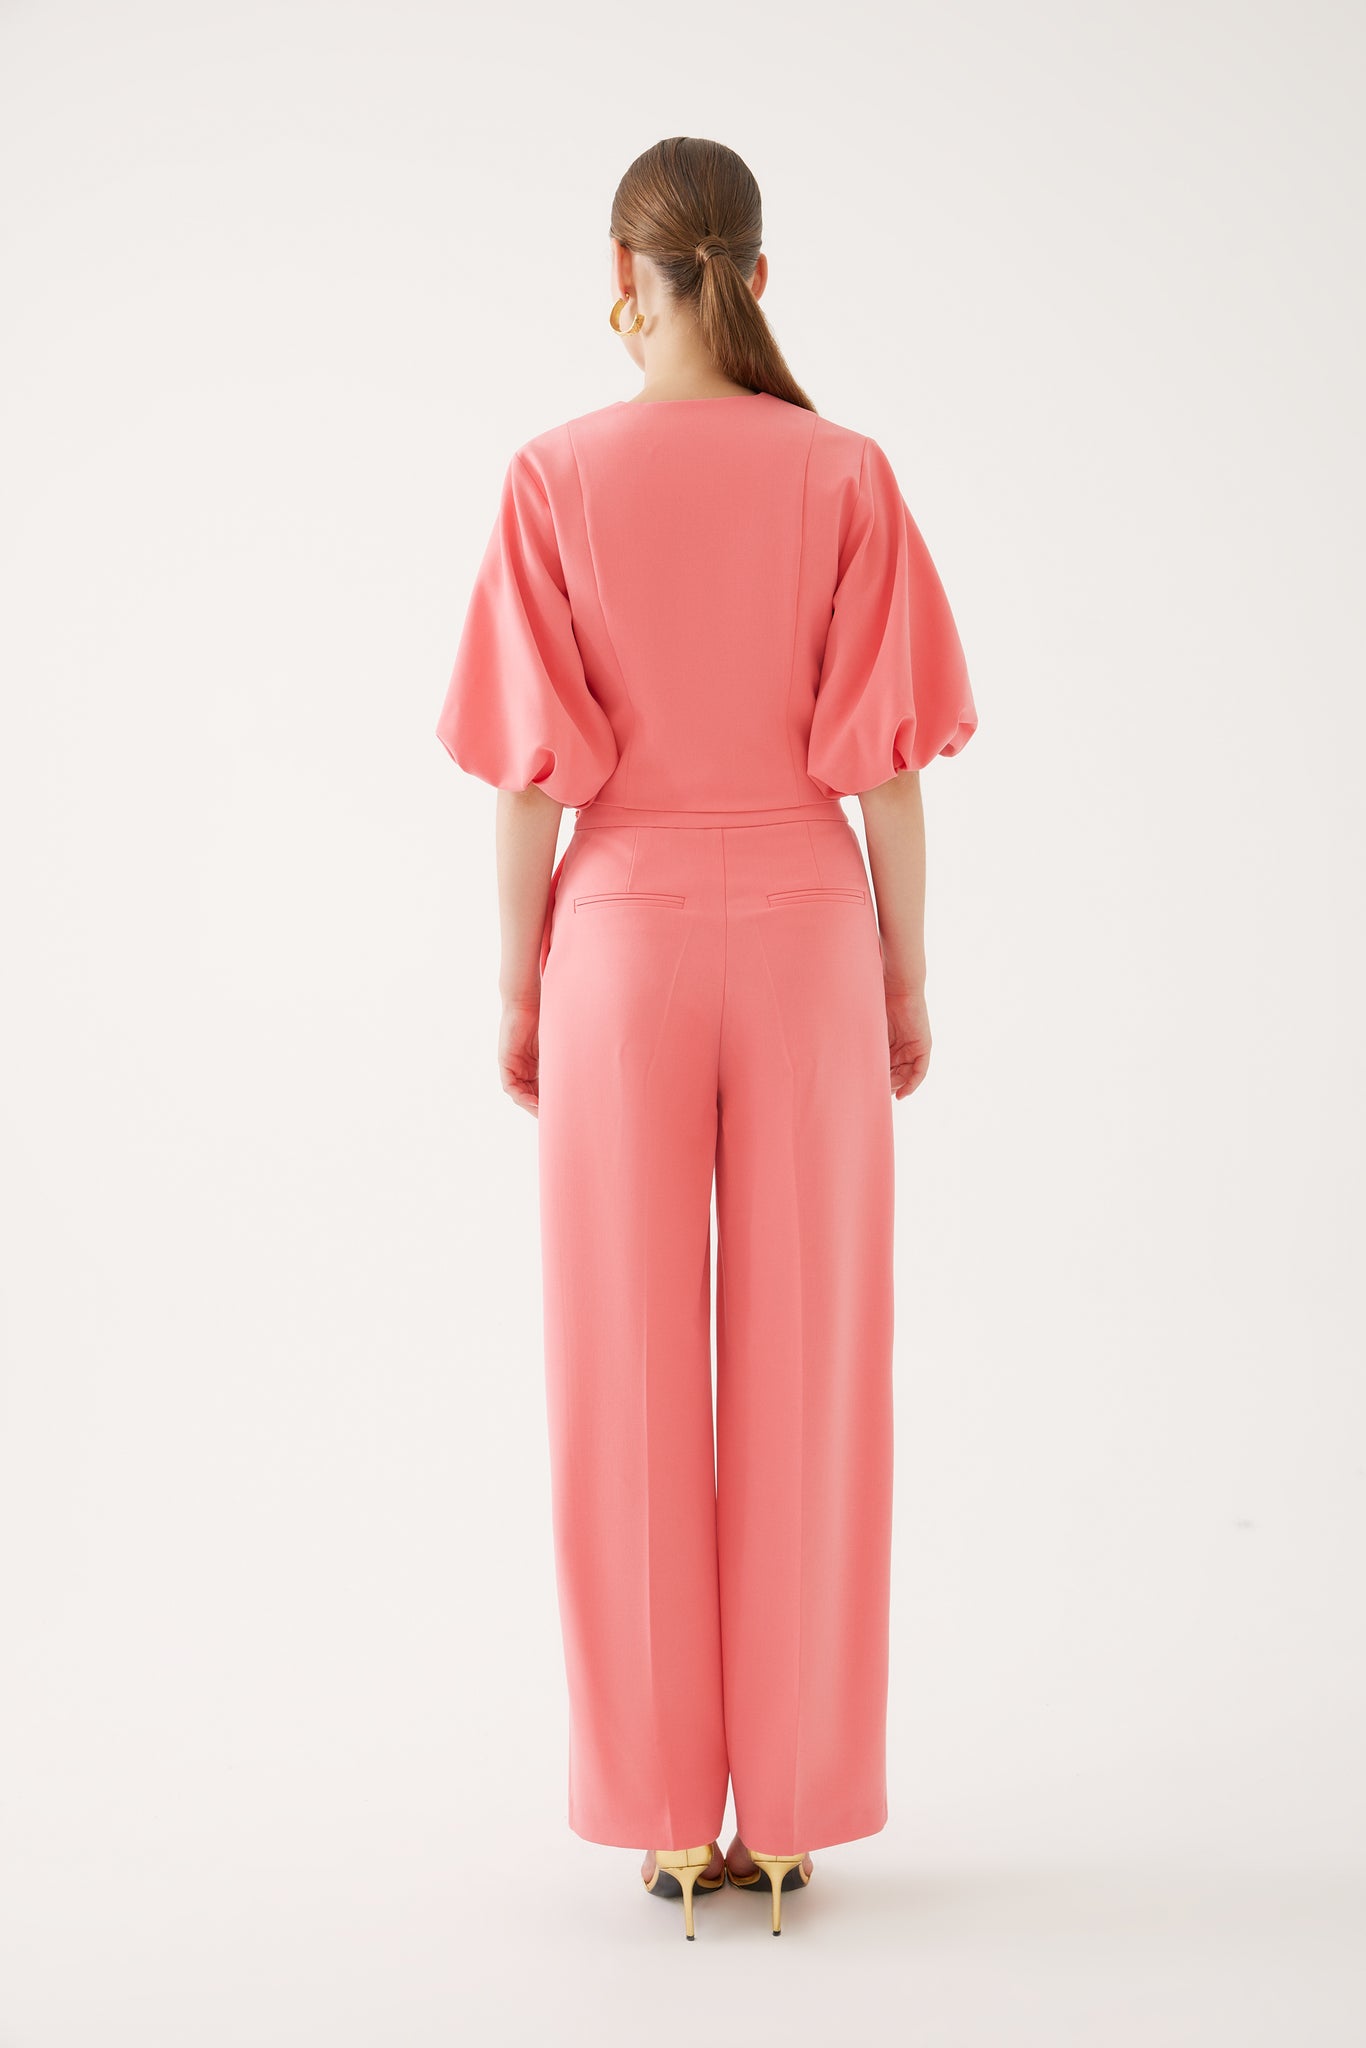 Exquise wide leg trousers in coral with chain detail on waistband
Product code 4210021